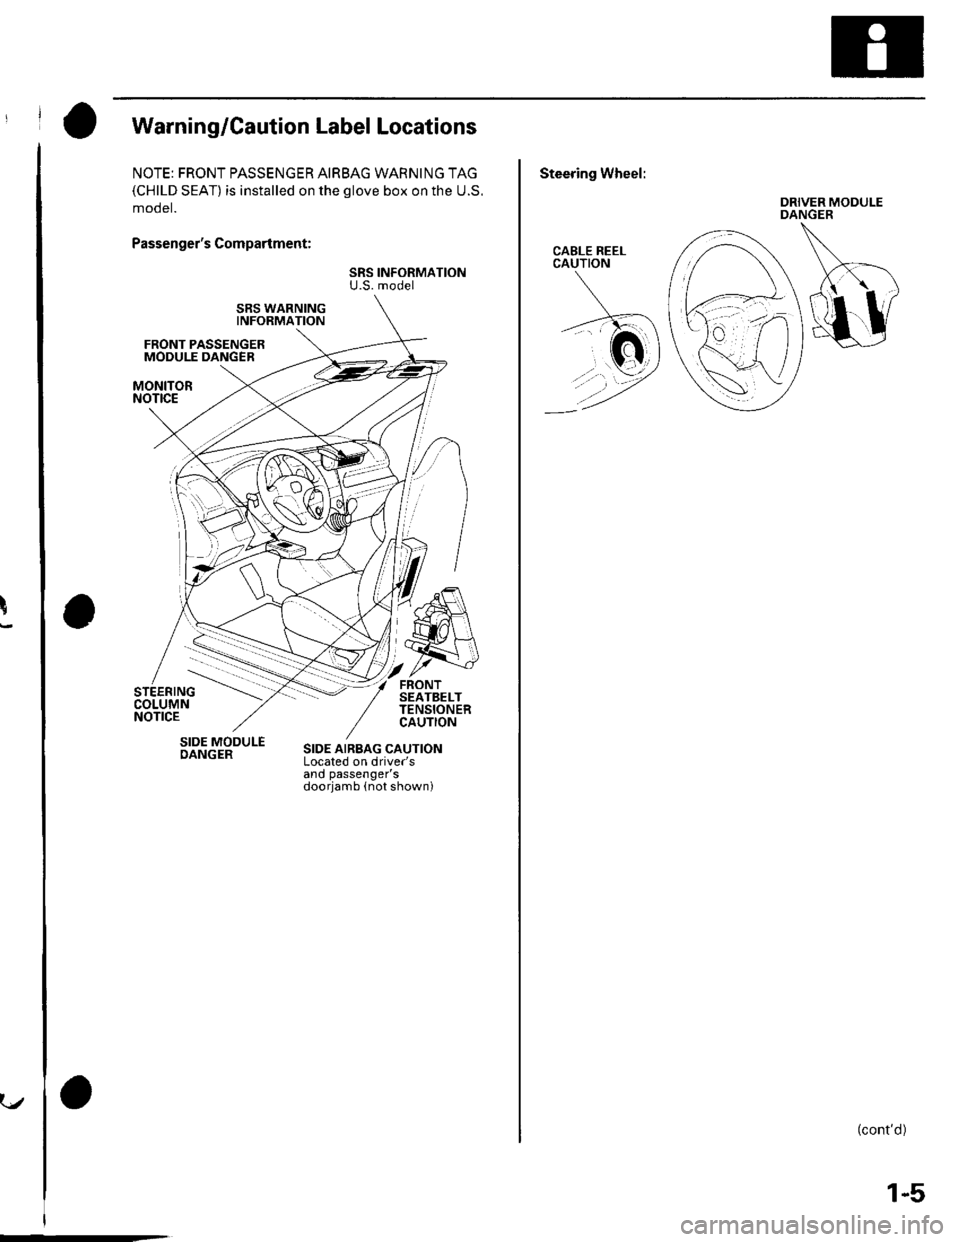 HONDA CIVIC 2003 7.G Workshop Manual !
..r
, I O warning/cautionLabelLocations
NOTE: FRONT PASSENGER AIRBAG WARNING TAG(CHILD SEAT) is installed on the glove box on the U.S.
mooet.
Passengers Compartment:
SRS INFORMATIONU.S. model
SRS 